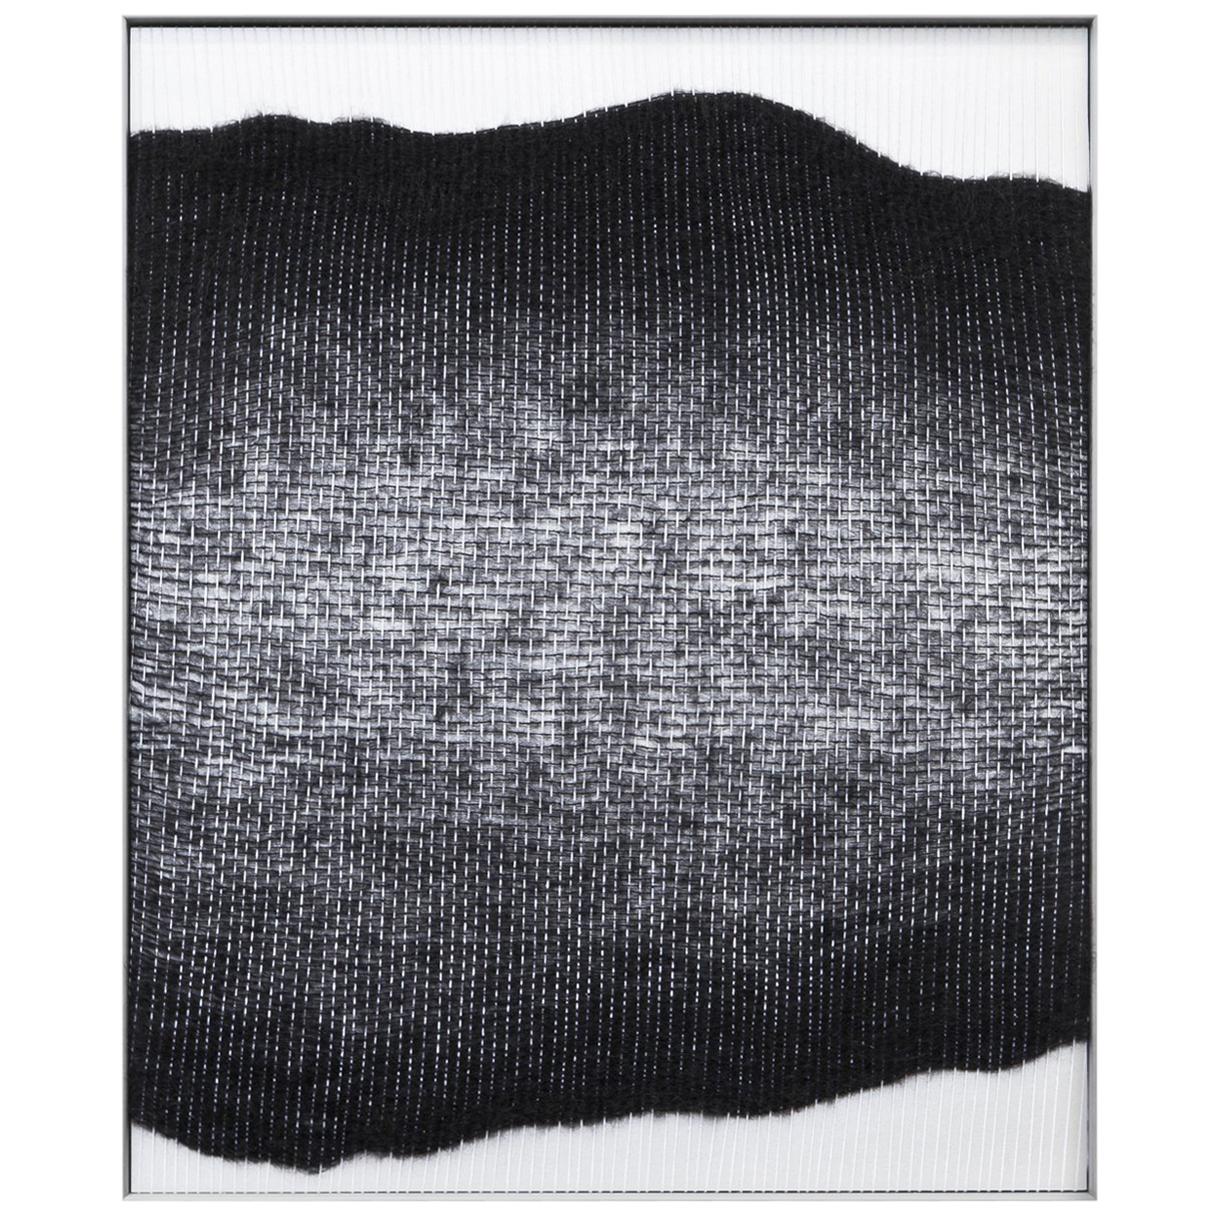 Contemporary Handwoven Wall Fiber Art, Black Live Edge Form by Mimi Jung For Sale